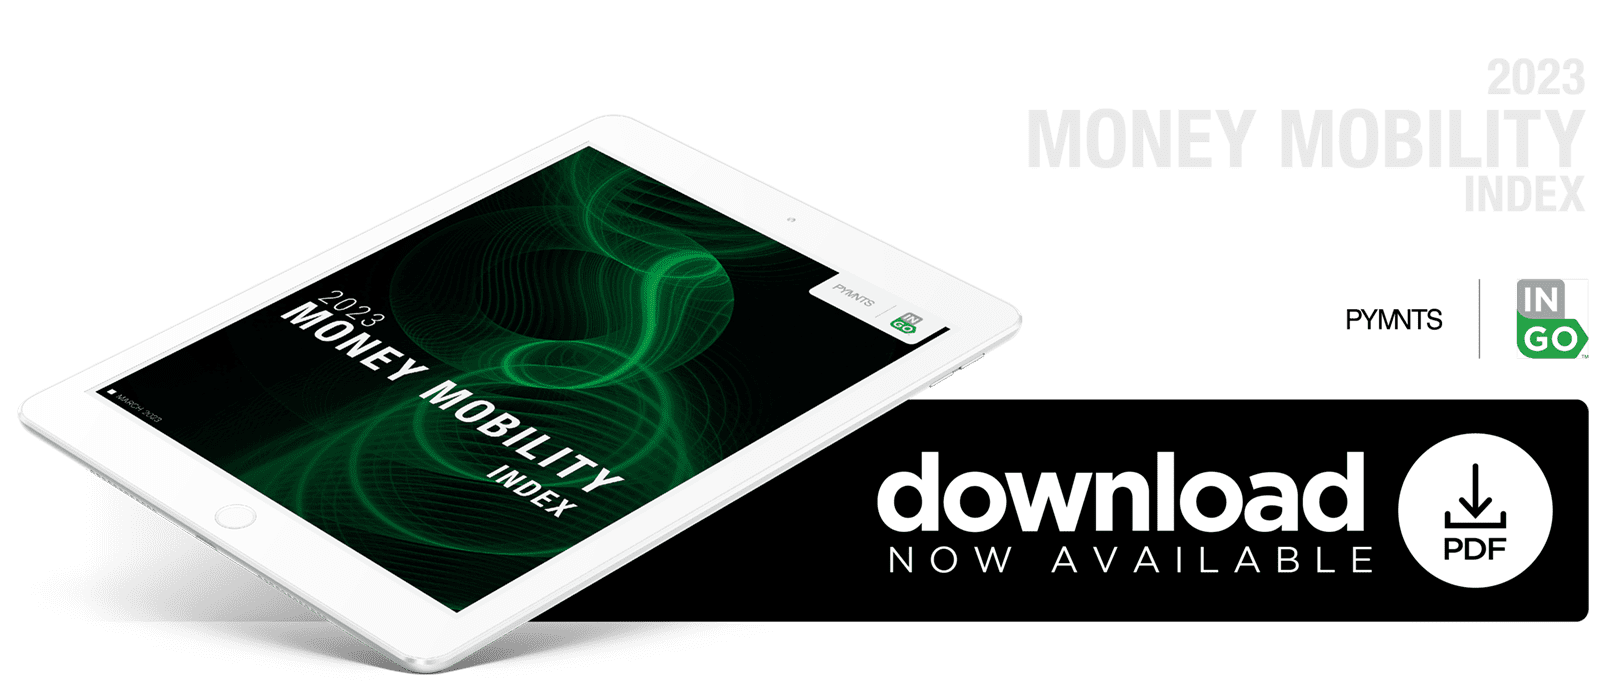 Download the PYMNTS and Ingo Money “2023 Money Mobility Index” to discover how better security and instant payments choice is key for financial services providers to improve customer satisfaction in moving money in and out of accounts.